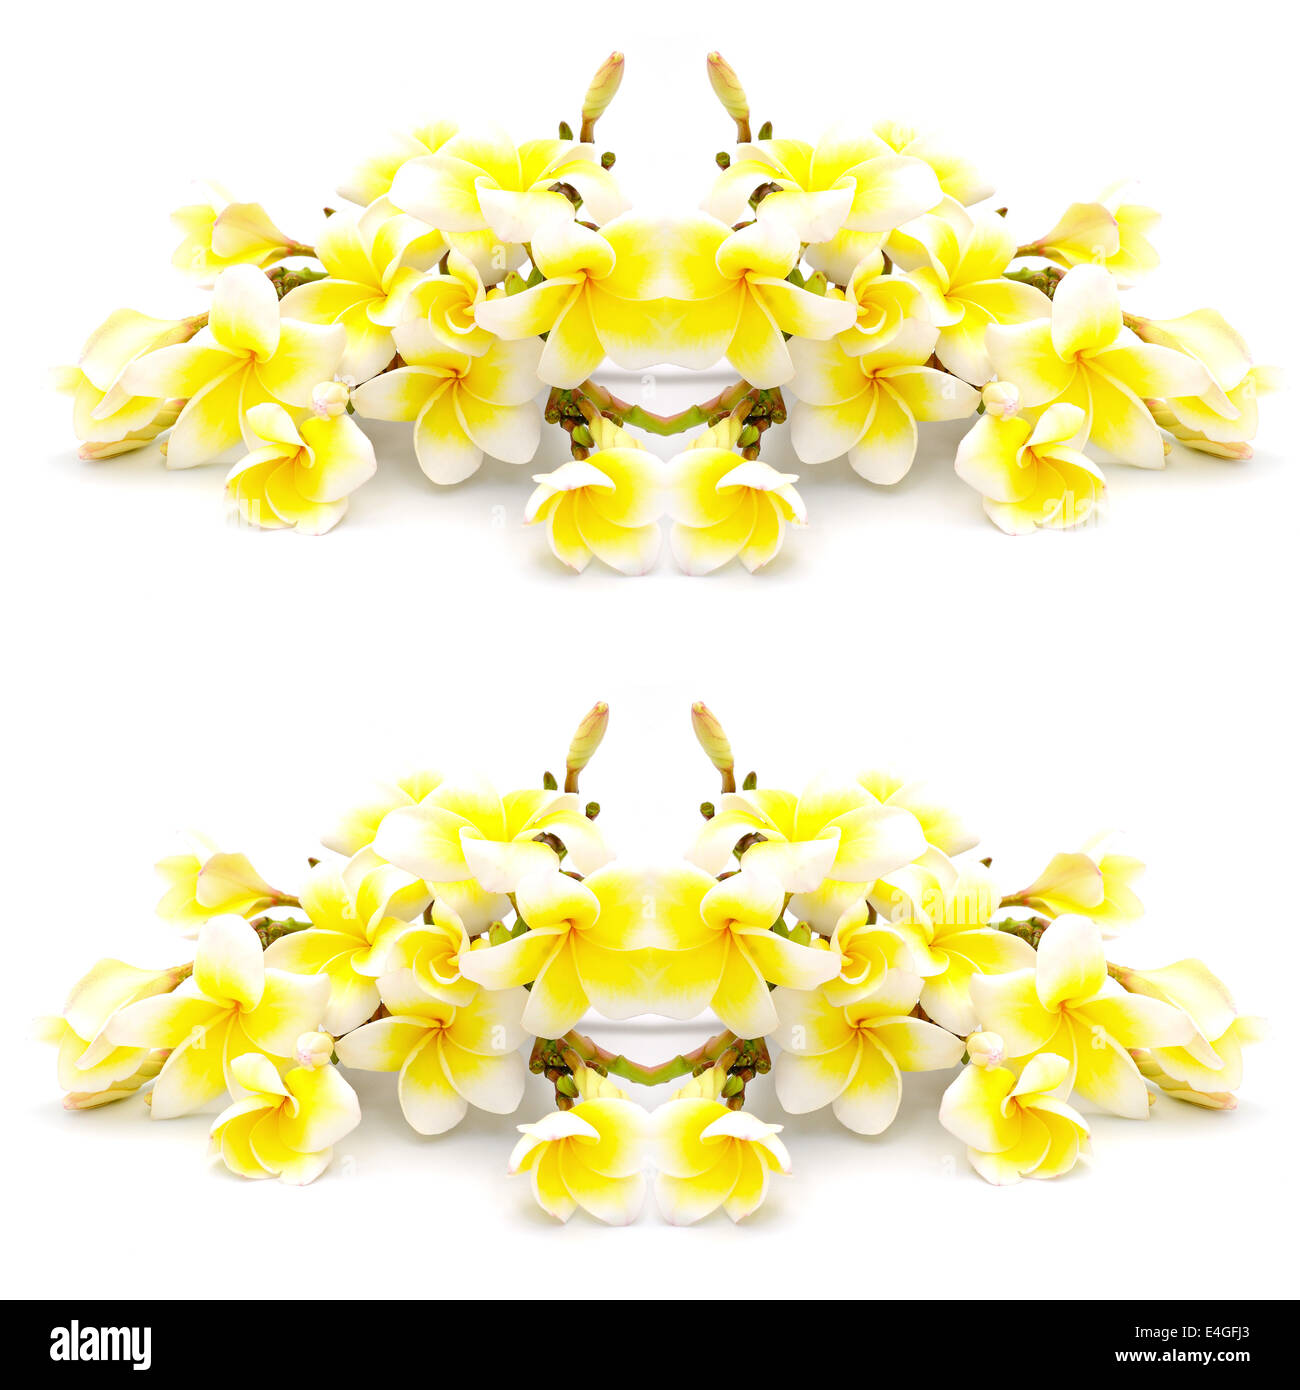 Colorful yellow plumeria flower, isolated on a white background Stock Photo